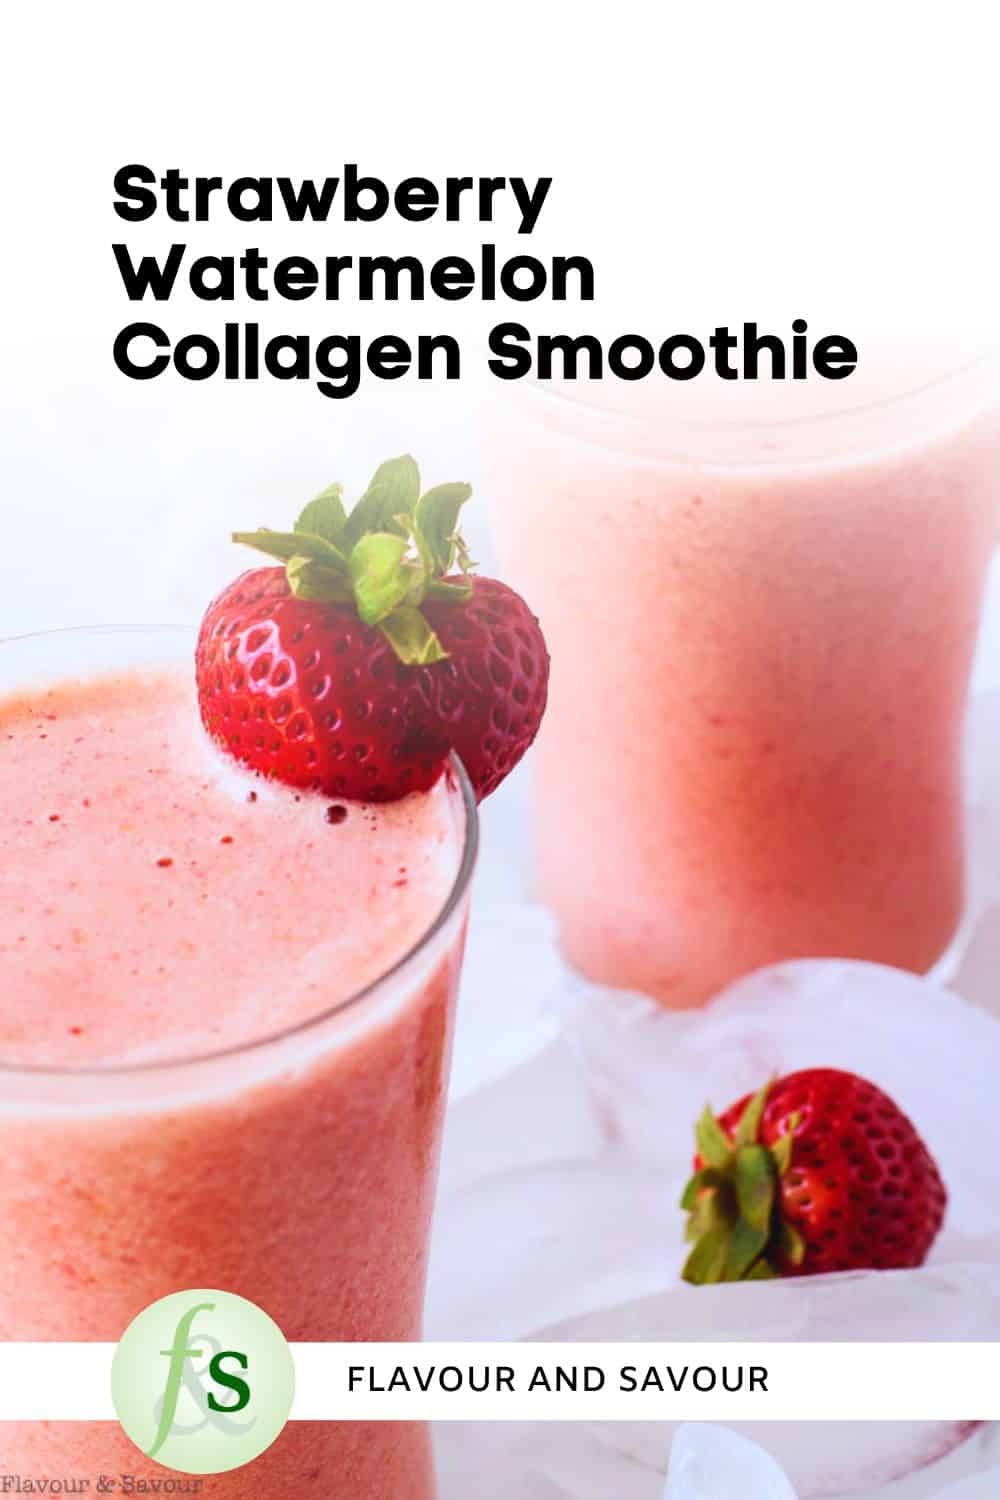 Image with text for strawberry watermelon collagen smoothie.